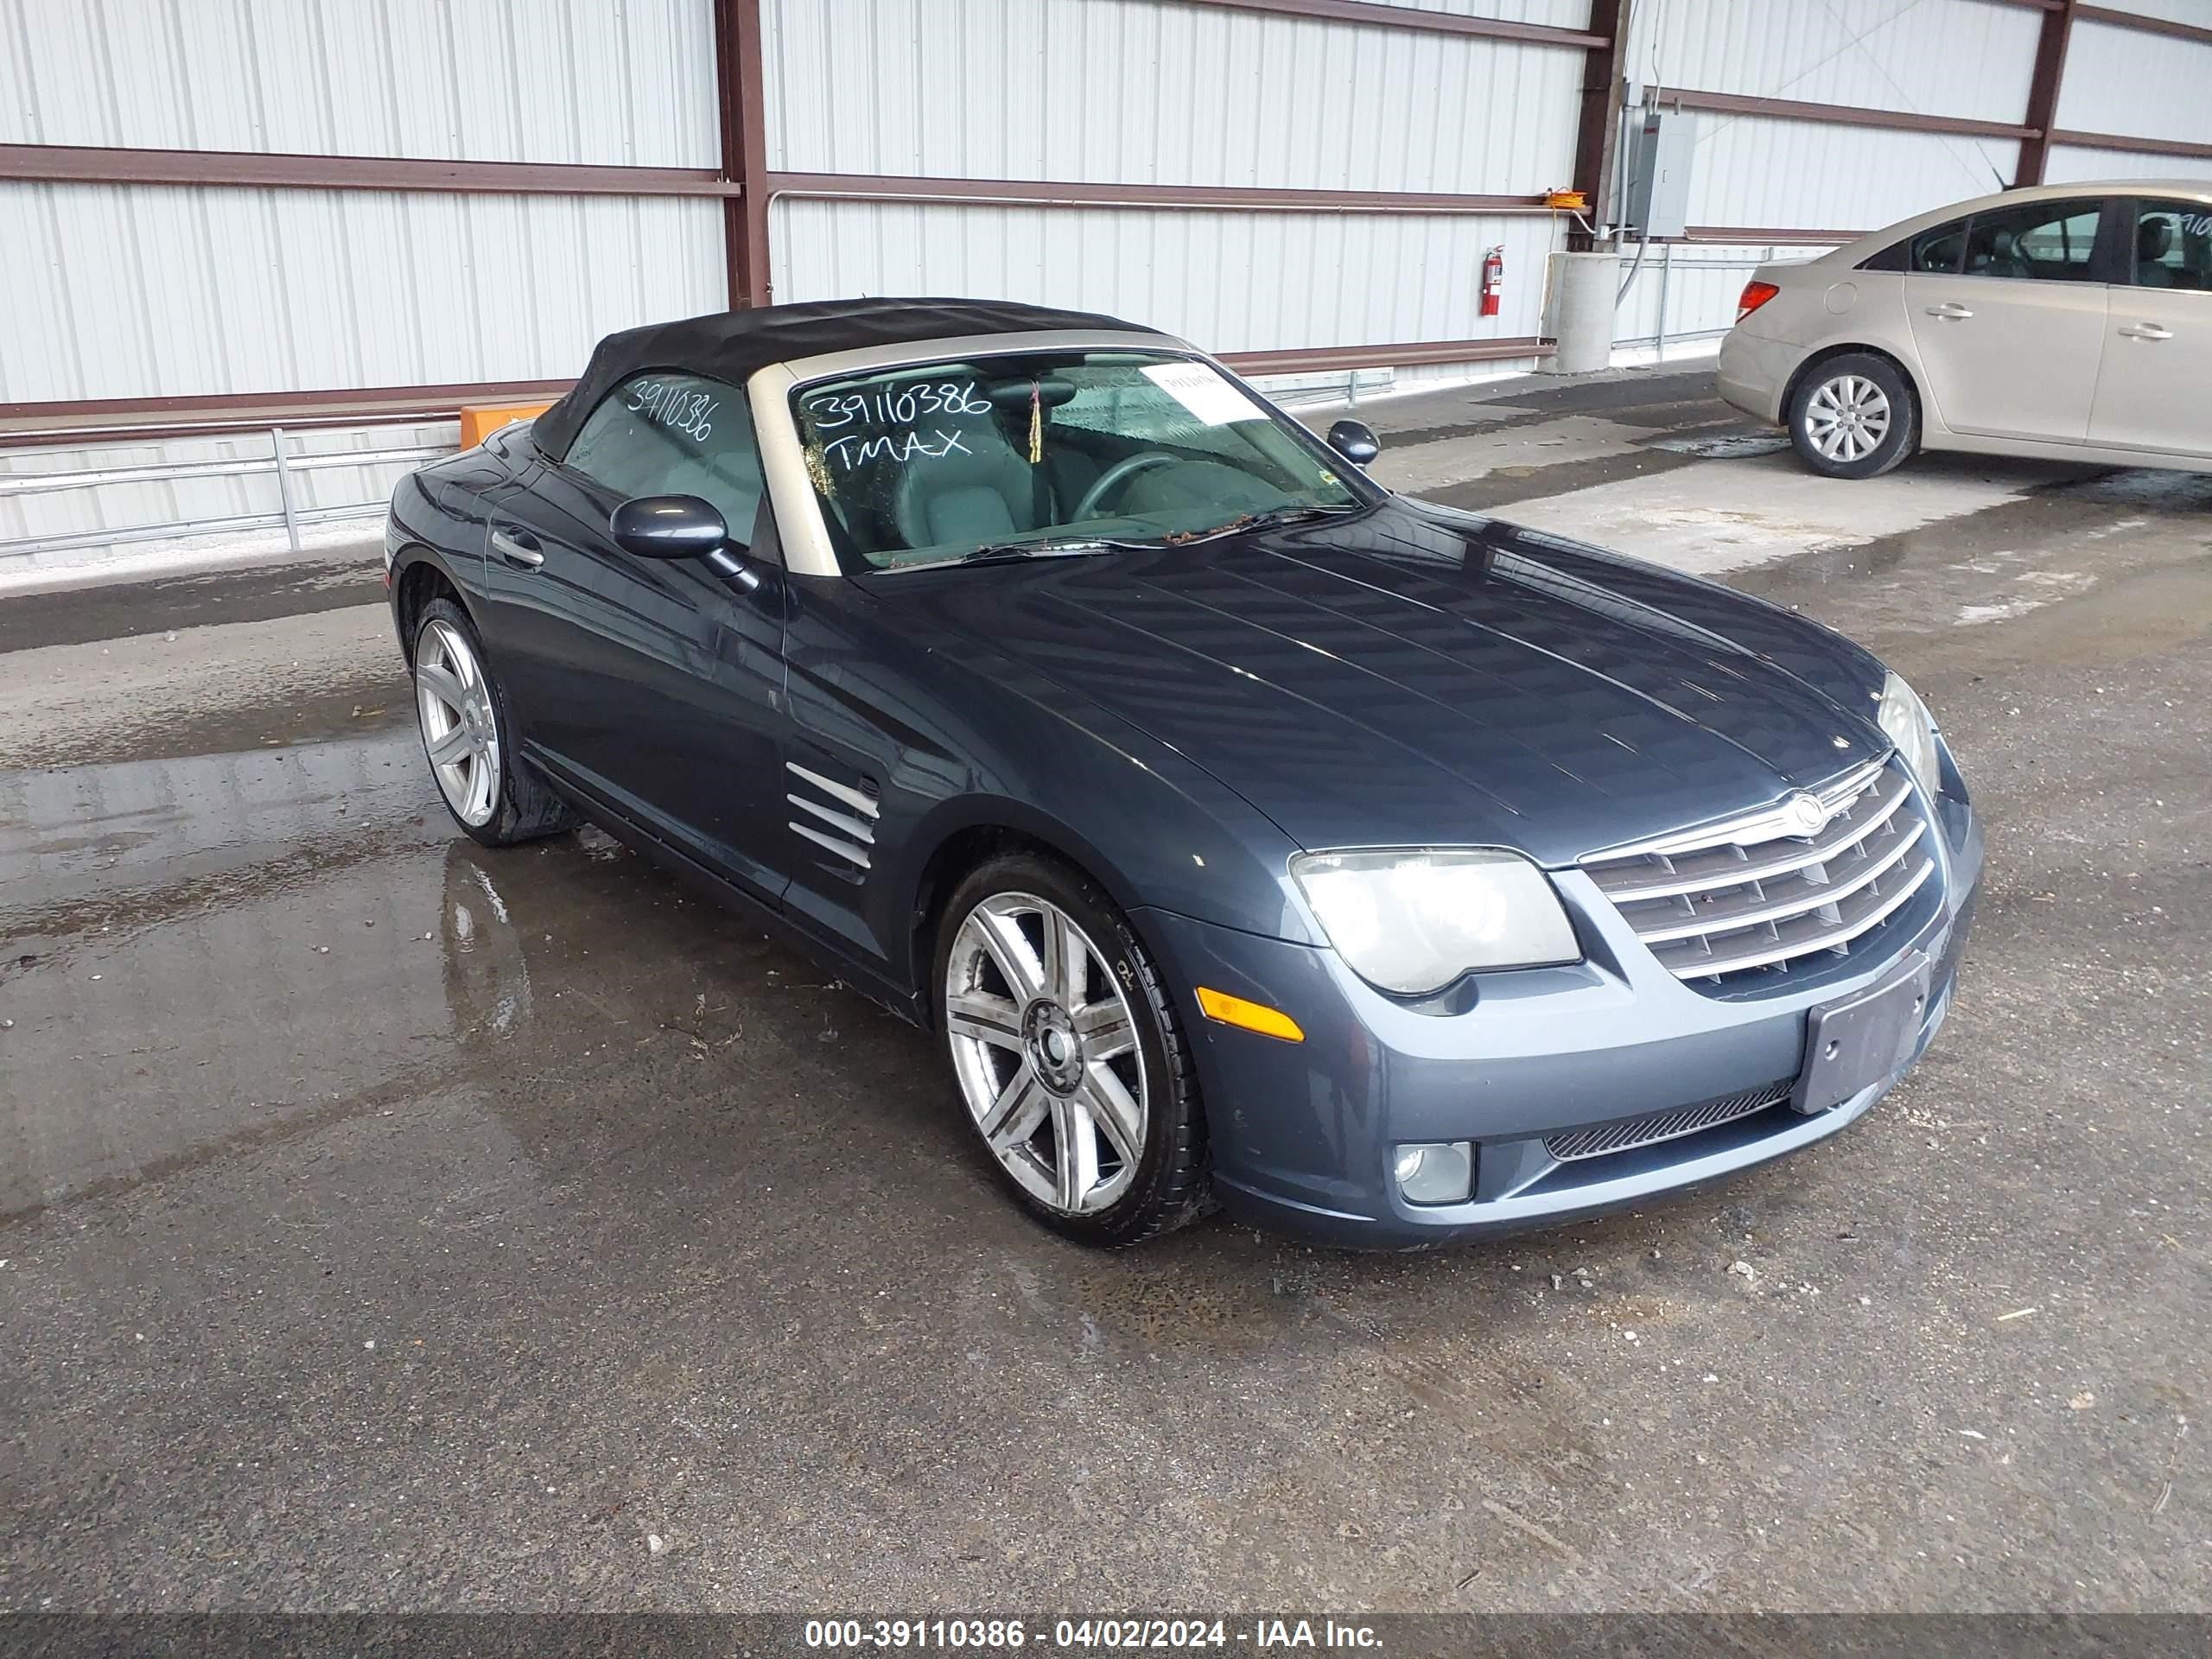 vin: 1C3AN65L76X069445 1C3AN65L76X069445 2006 chrysler crossfire 3200 for Sale in 64076, 1700 W Old Highway 40, Odessa, Missouri, USA